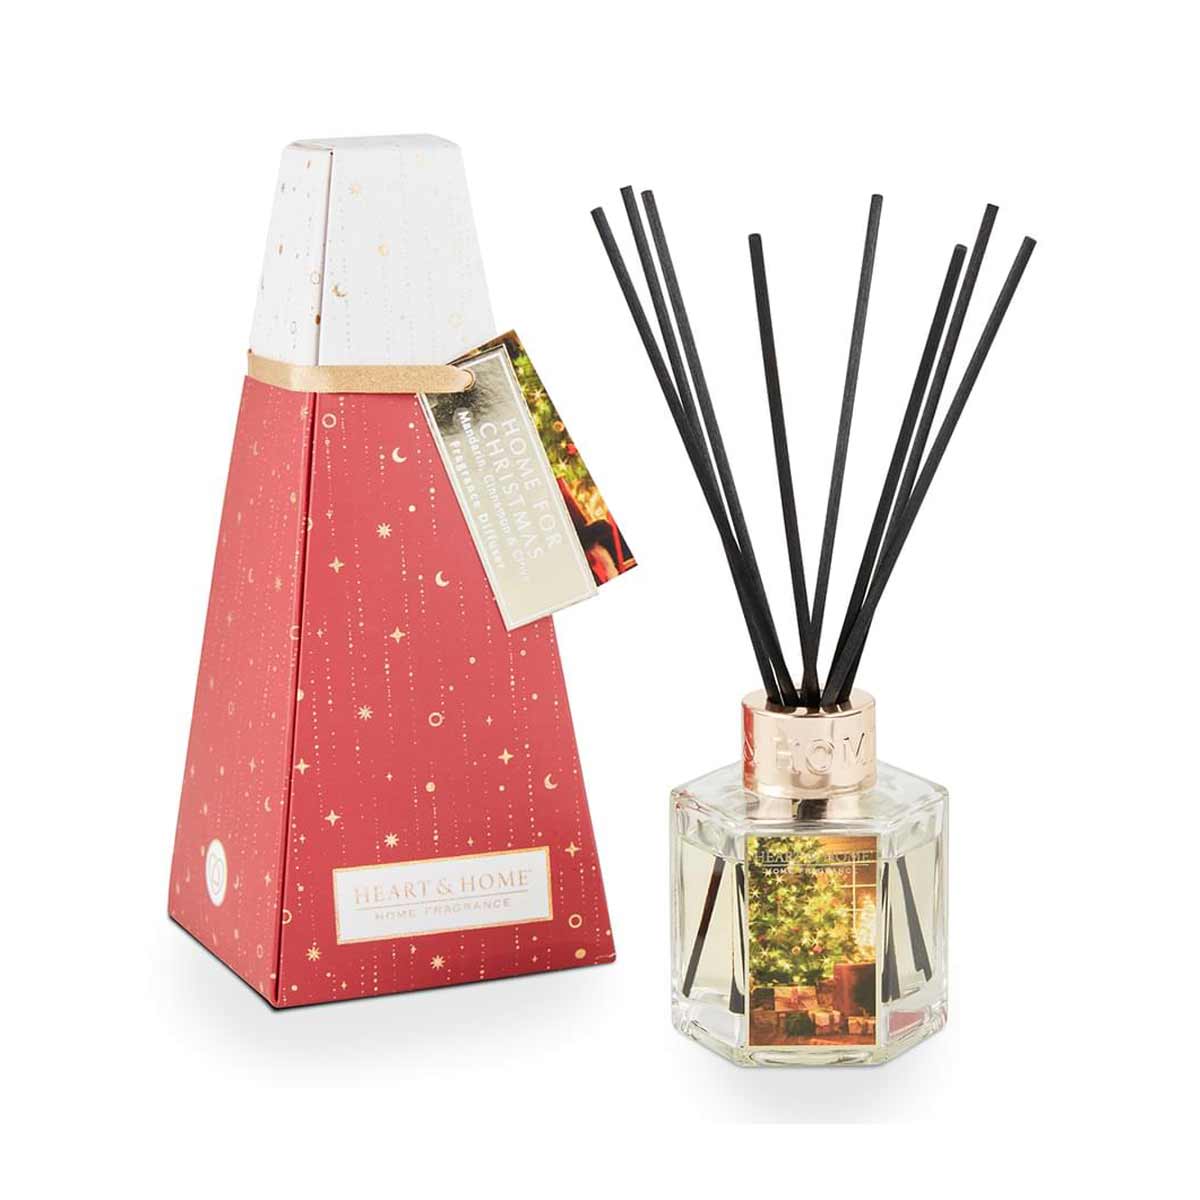 Heart and Home stick diffuser - Home for Christmas